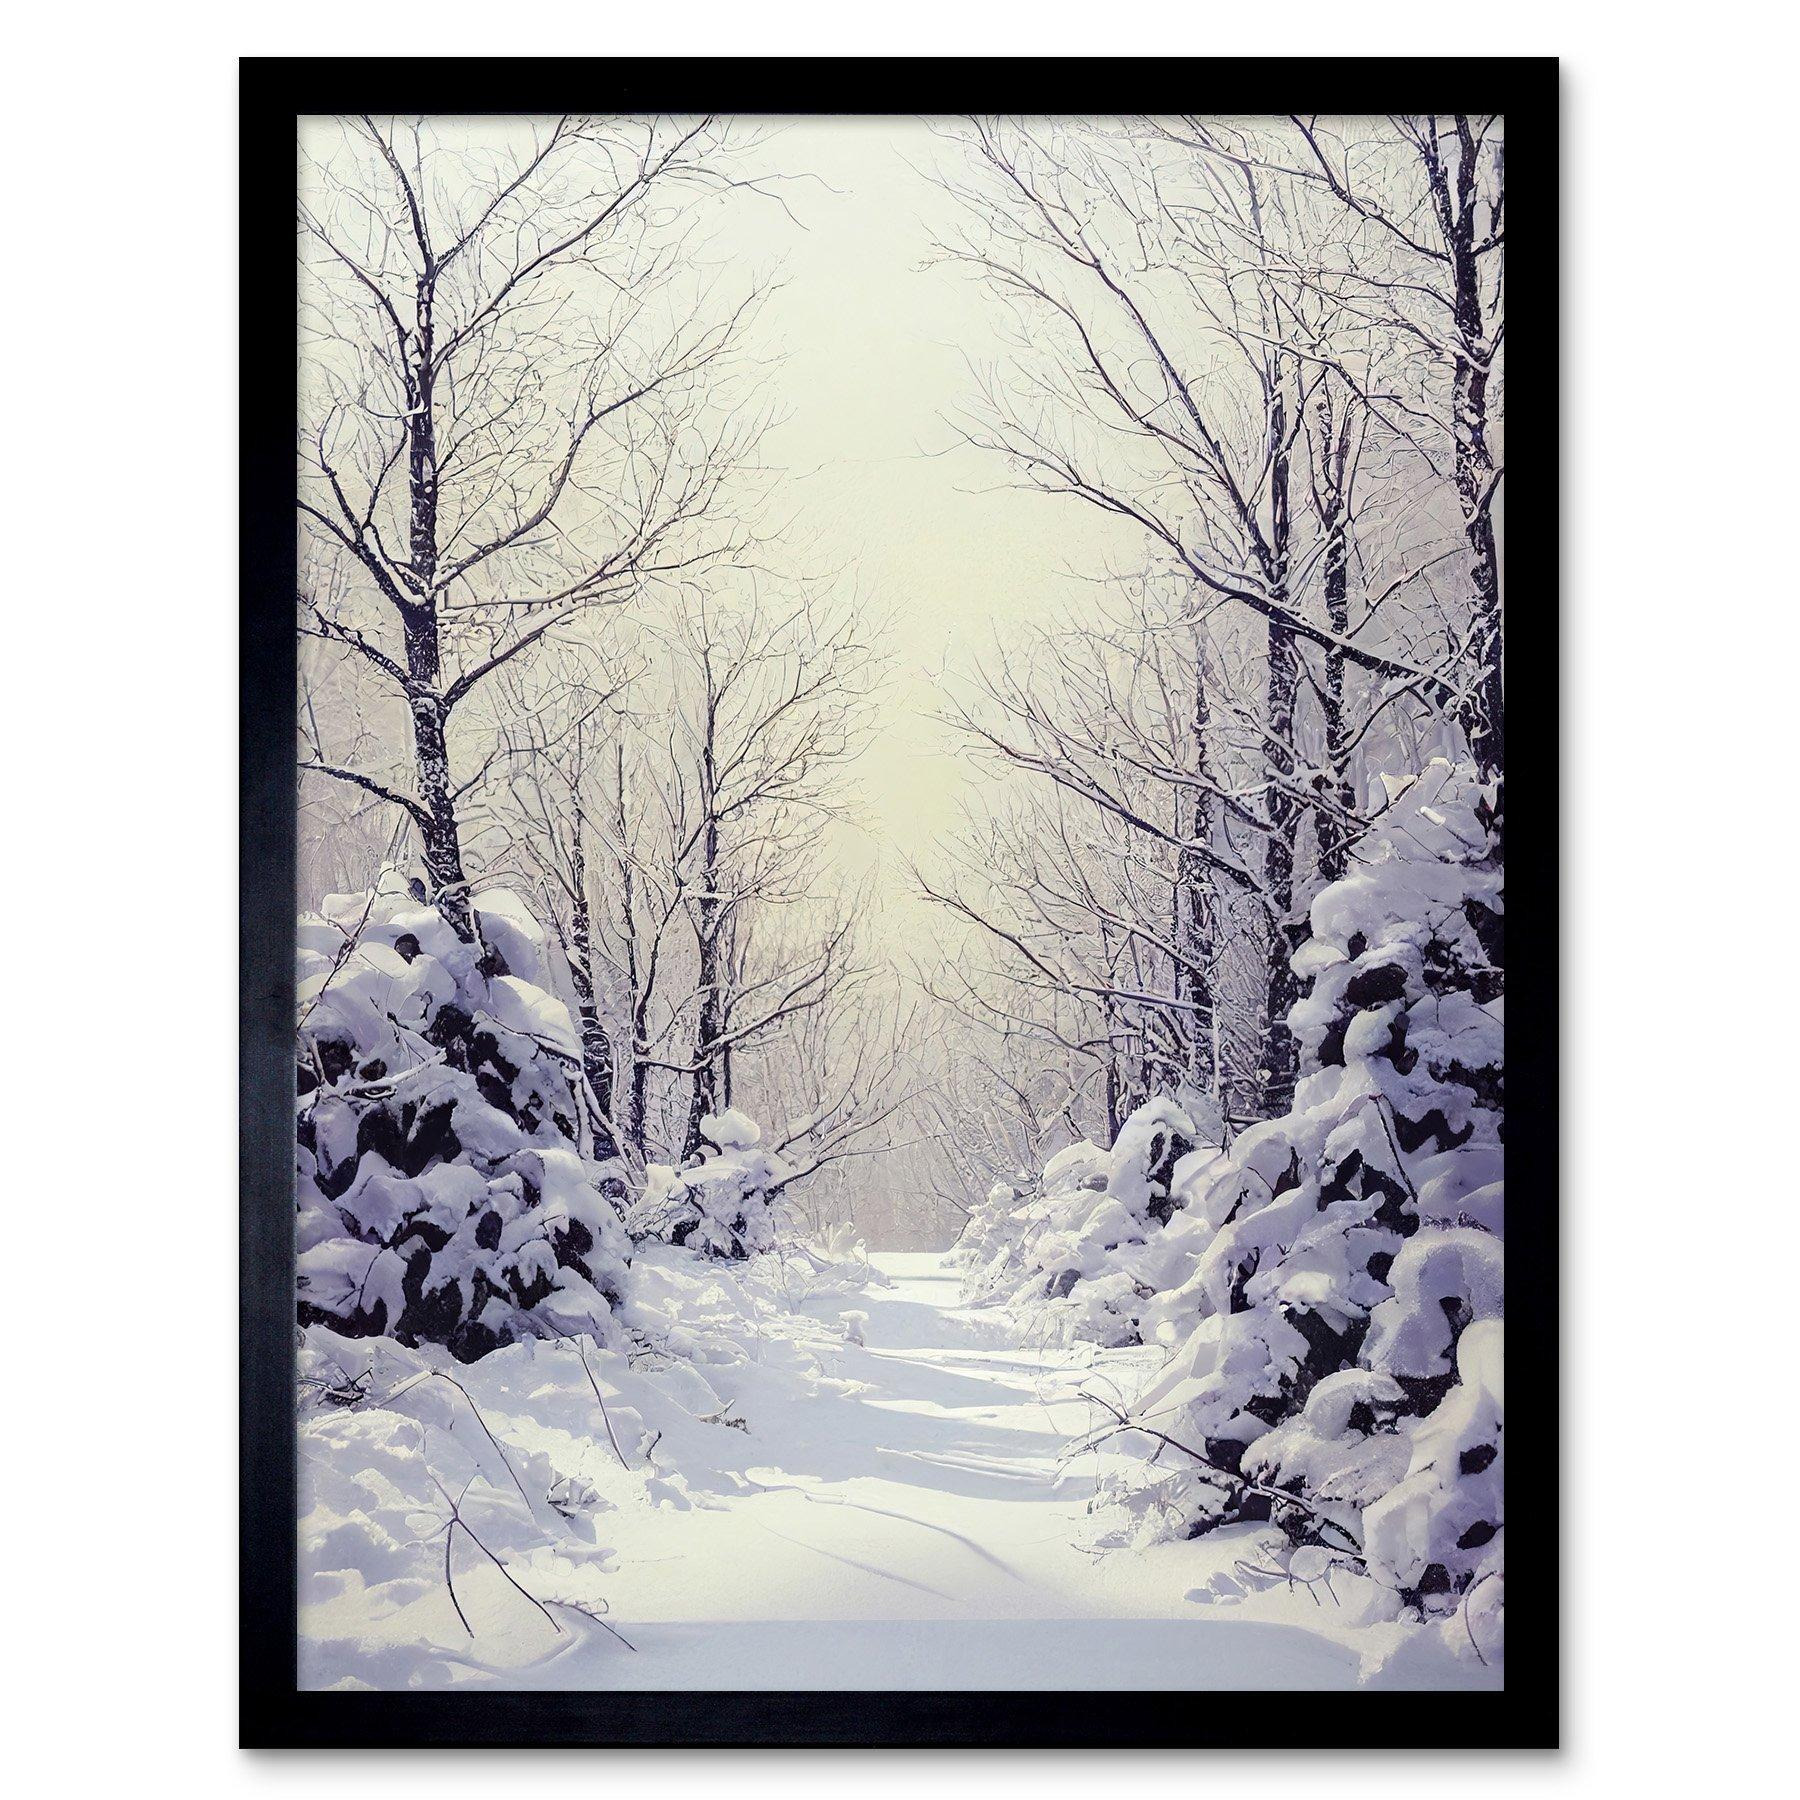 Snowed In Again Winter Tranquil Landscape Art Print Framed Poster Wall Decor 12x16 inch - image 1